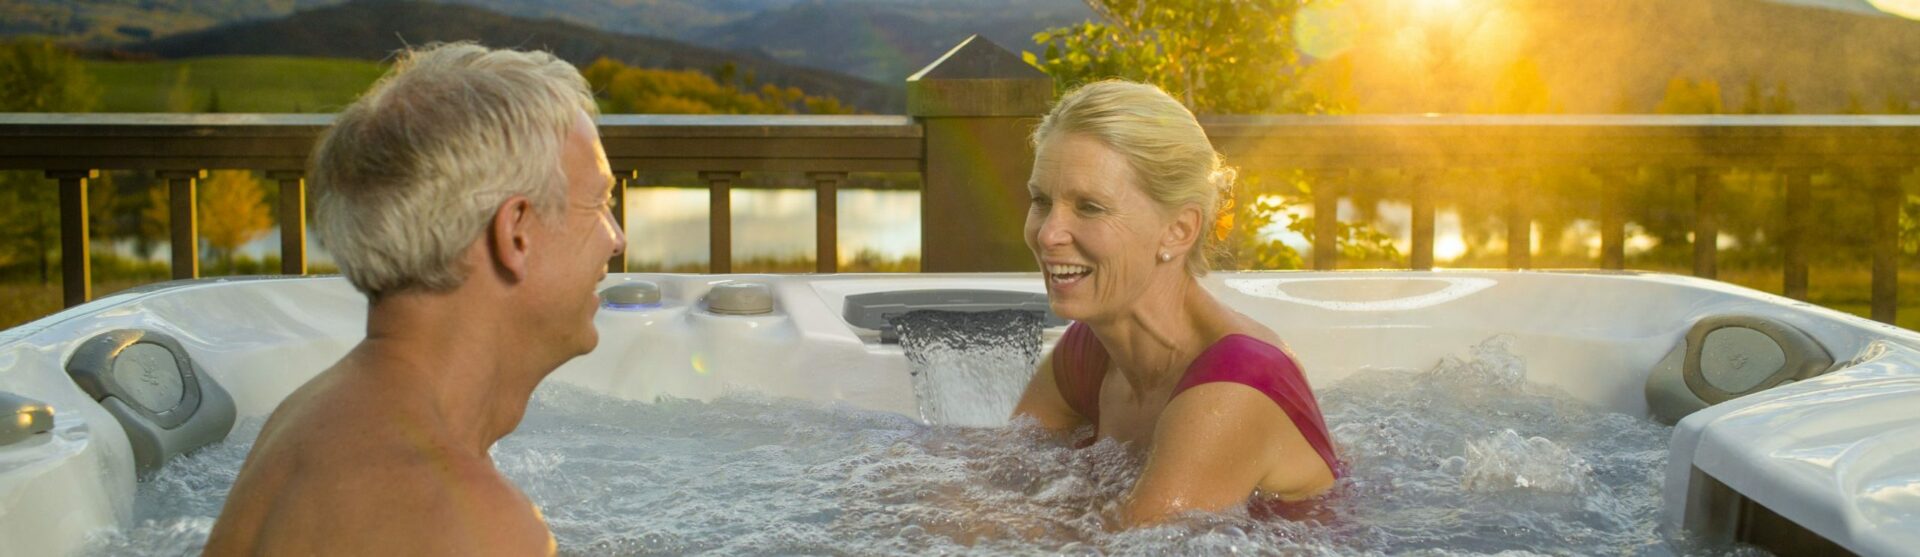 5 Hot Tub Benefits You Never Knew About